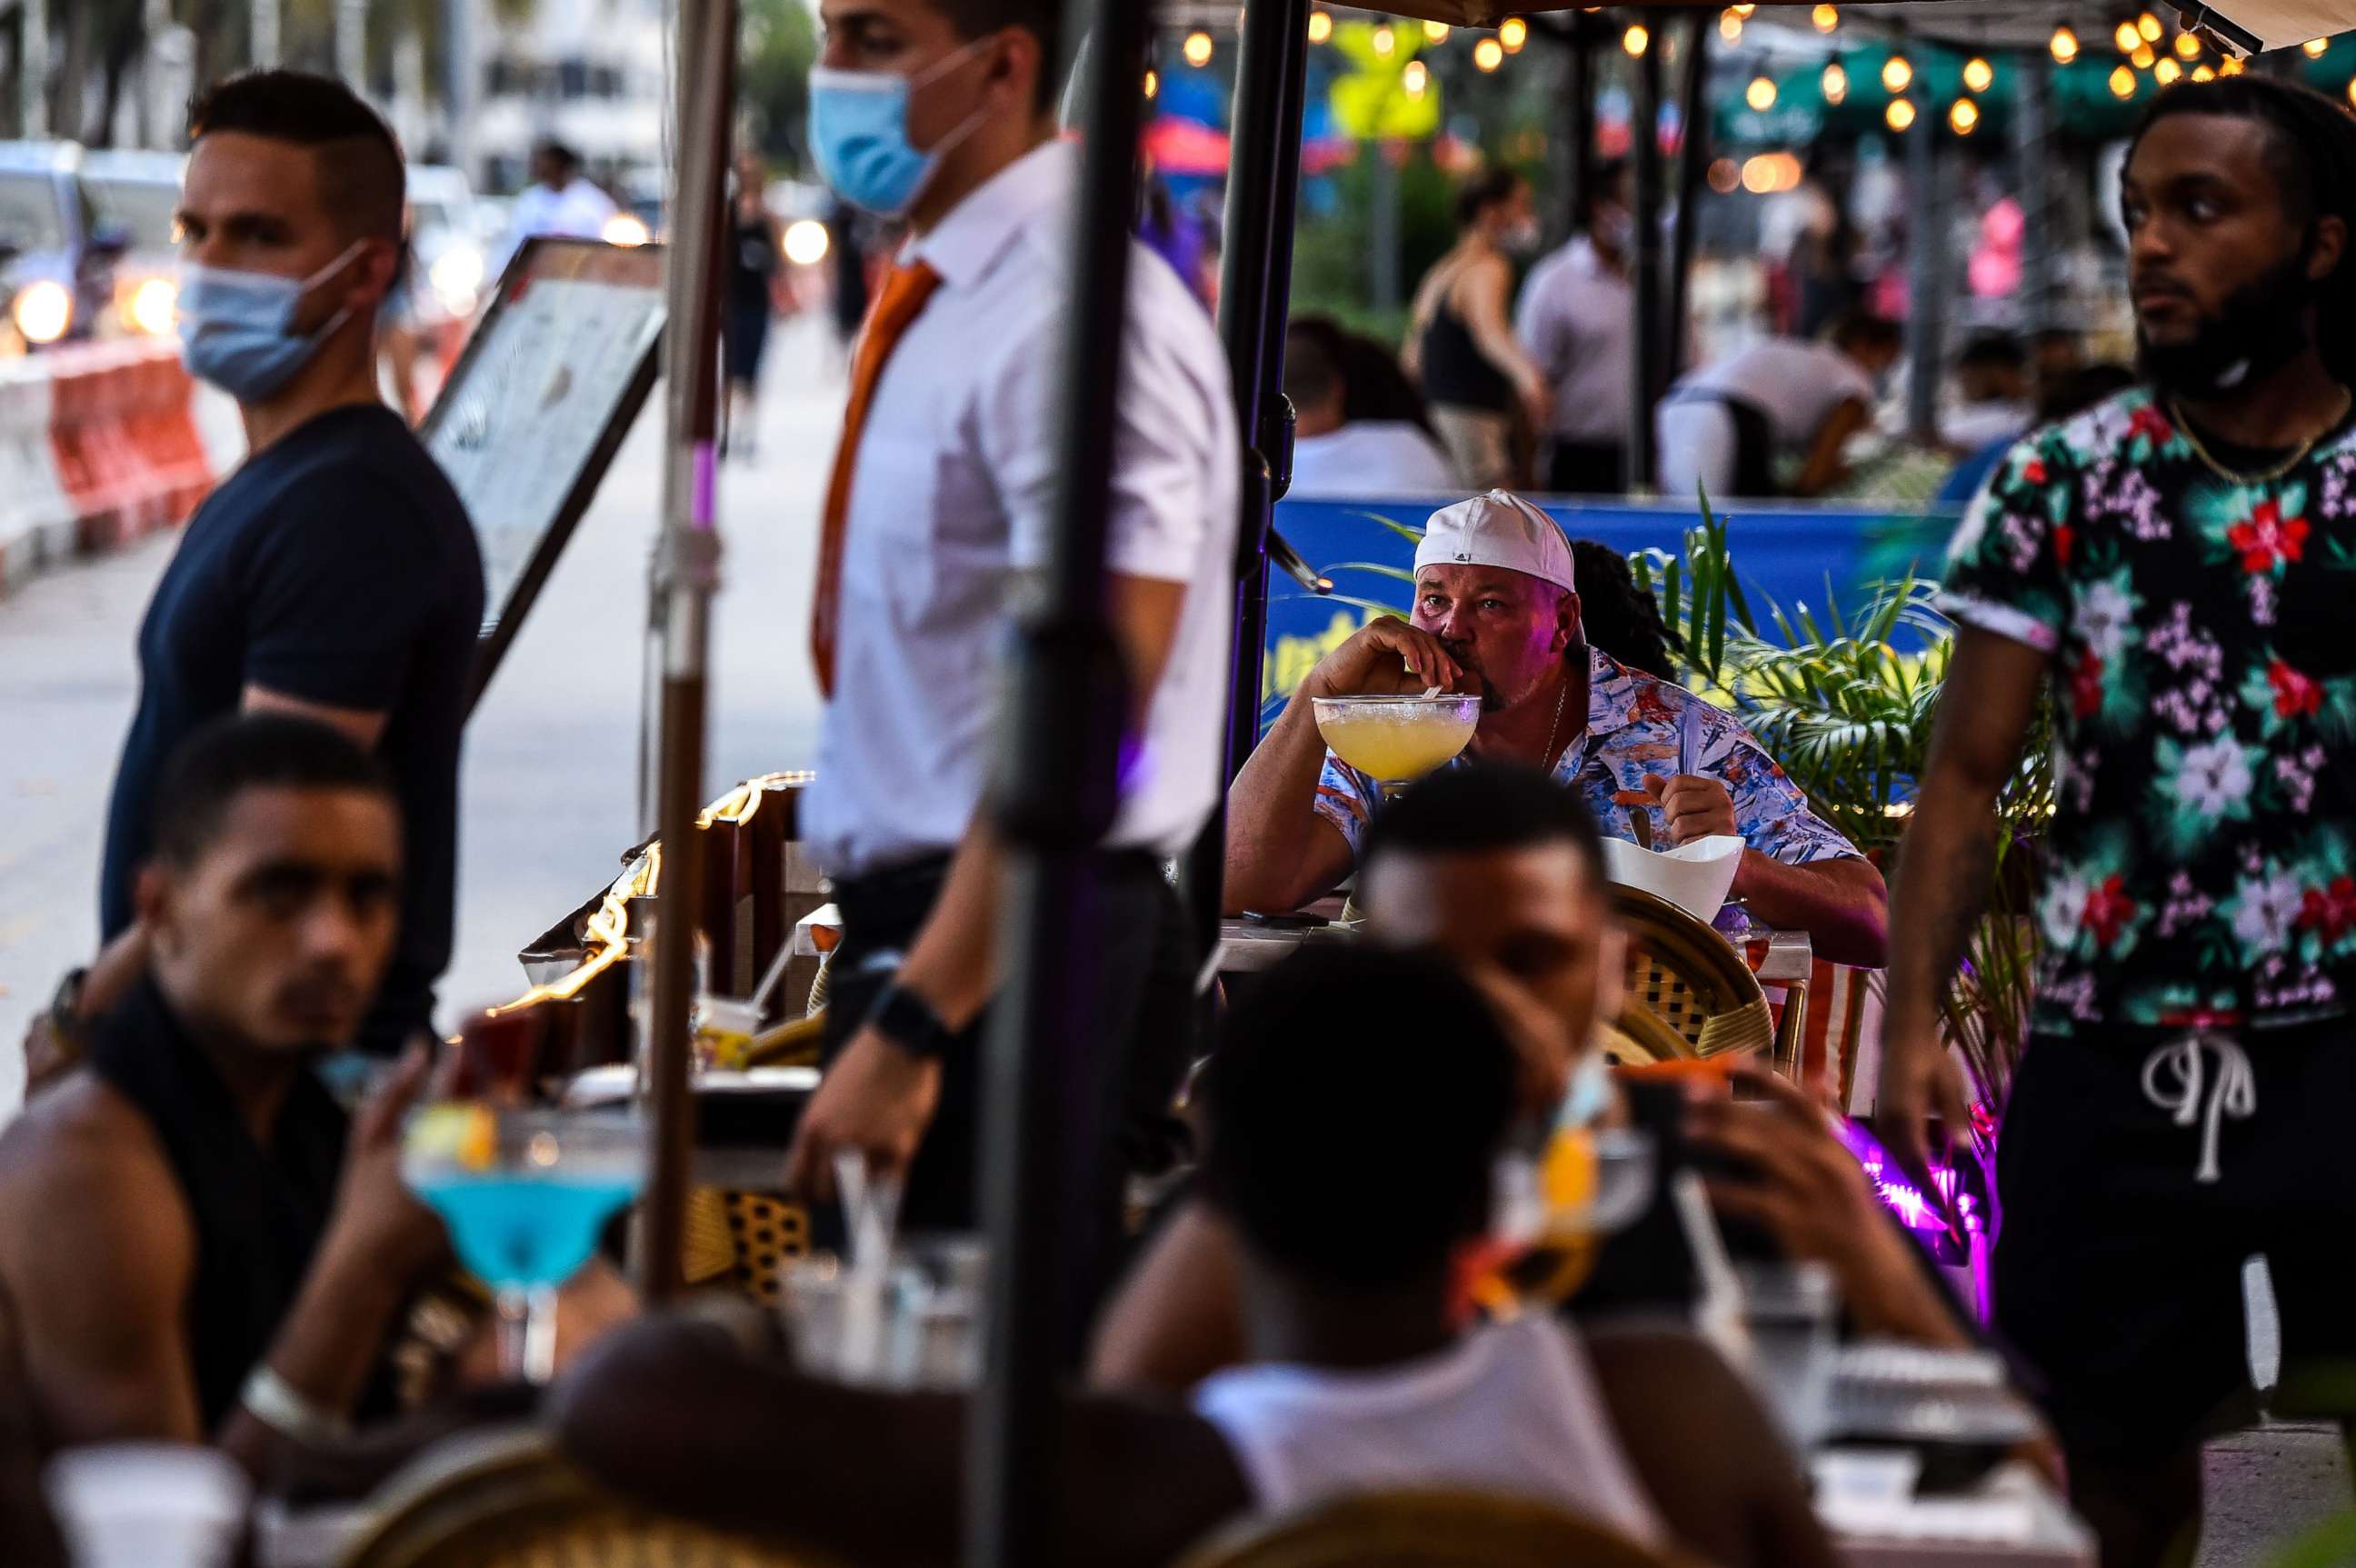 PHOTO: A man enjoys a drink at a restaurant on Ocean Drive in Miami Beach, Fla., July 14, 2020, during the coronavirus pandemic.